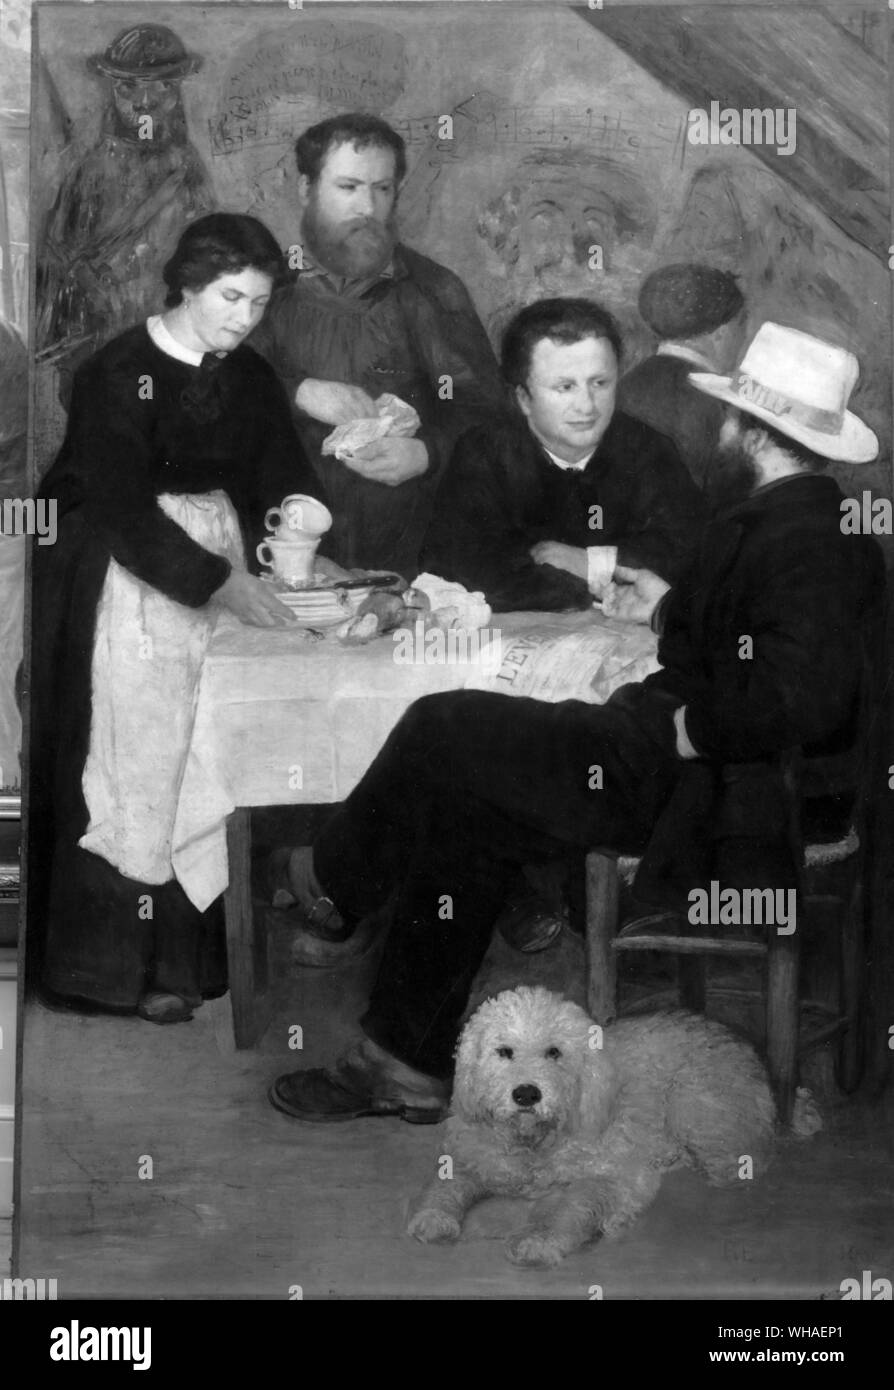 Renoir: At the Inn of Mother Anthony Marlotte 1866. Left to right: Nana, the painter Lecoeur, an unknown man, Mother Anthony, Sisley. Infront Lecoeur's white poodle. Marlotte is near the forest of Fontainbleu Stock Photo